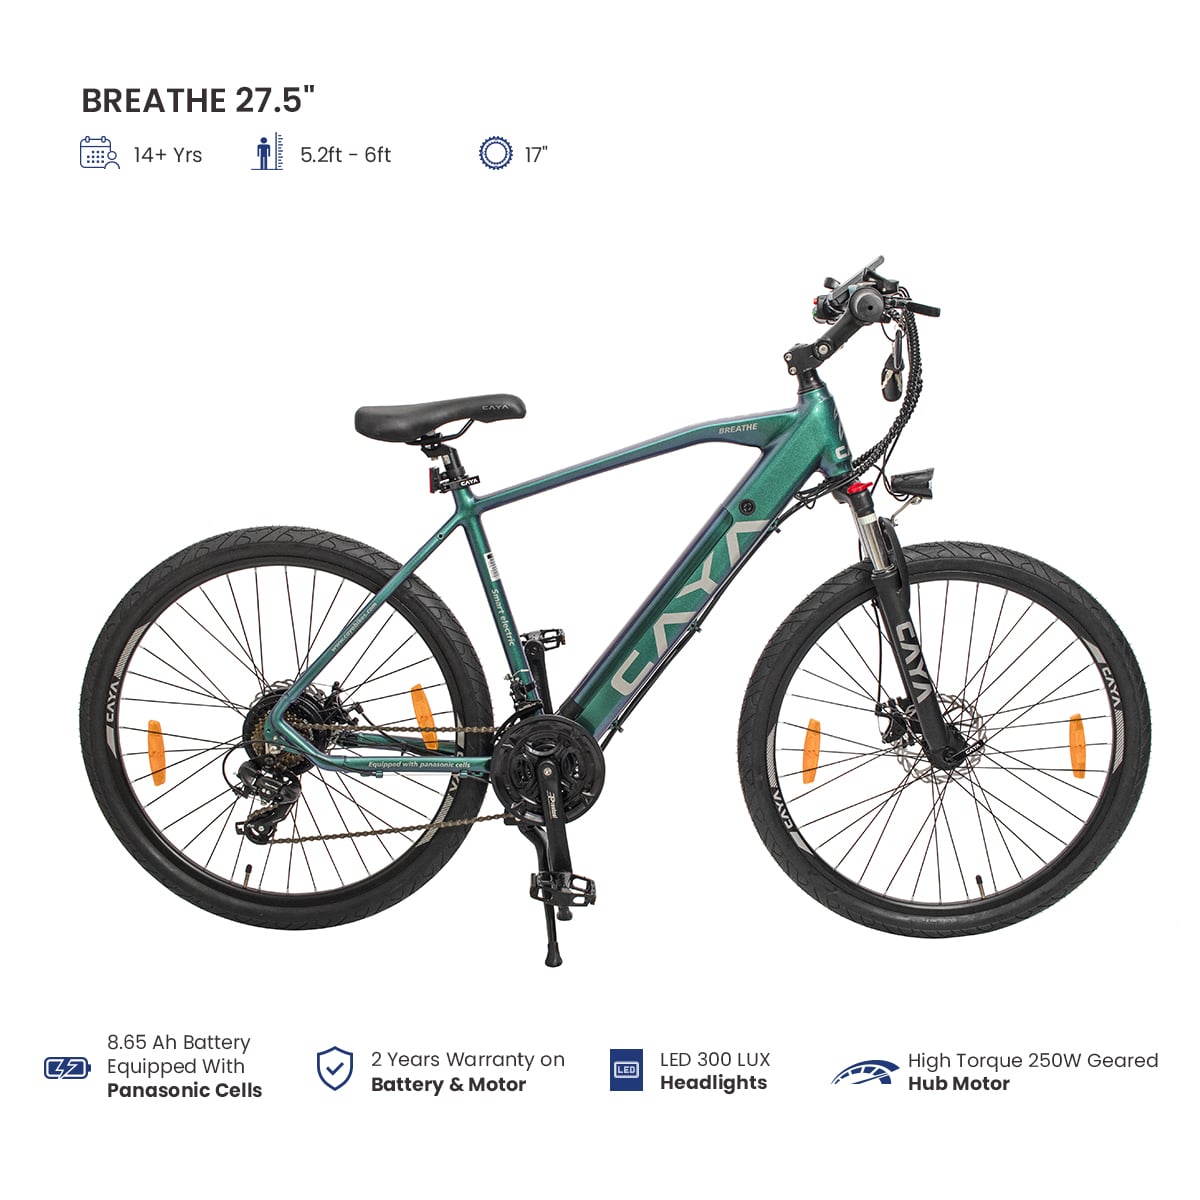 CAYA Breathe 27.5 Electric Bicycle